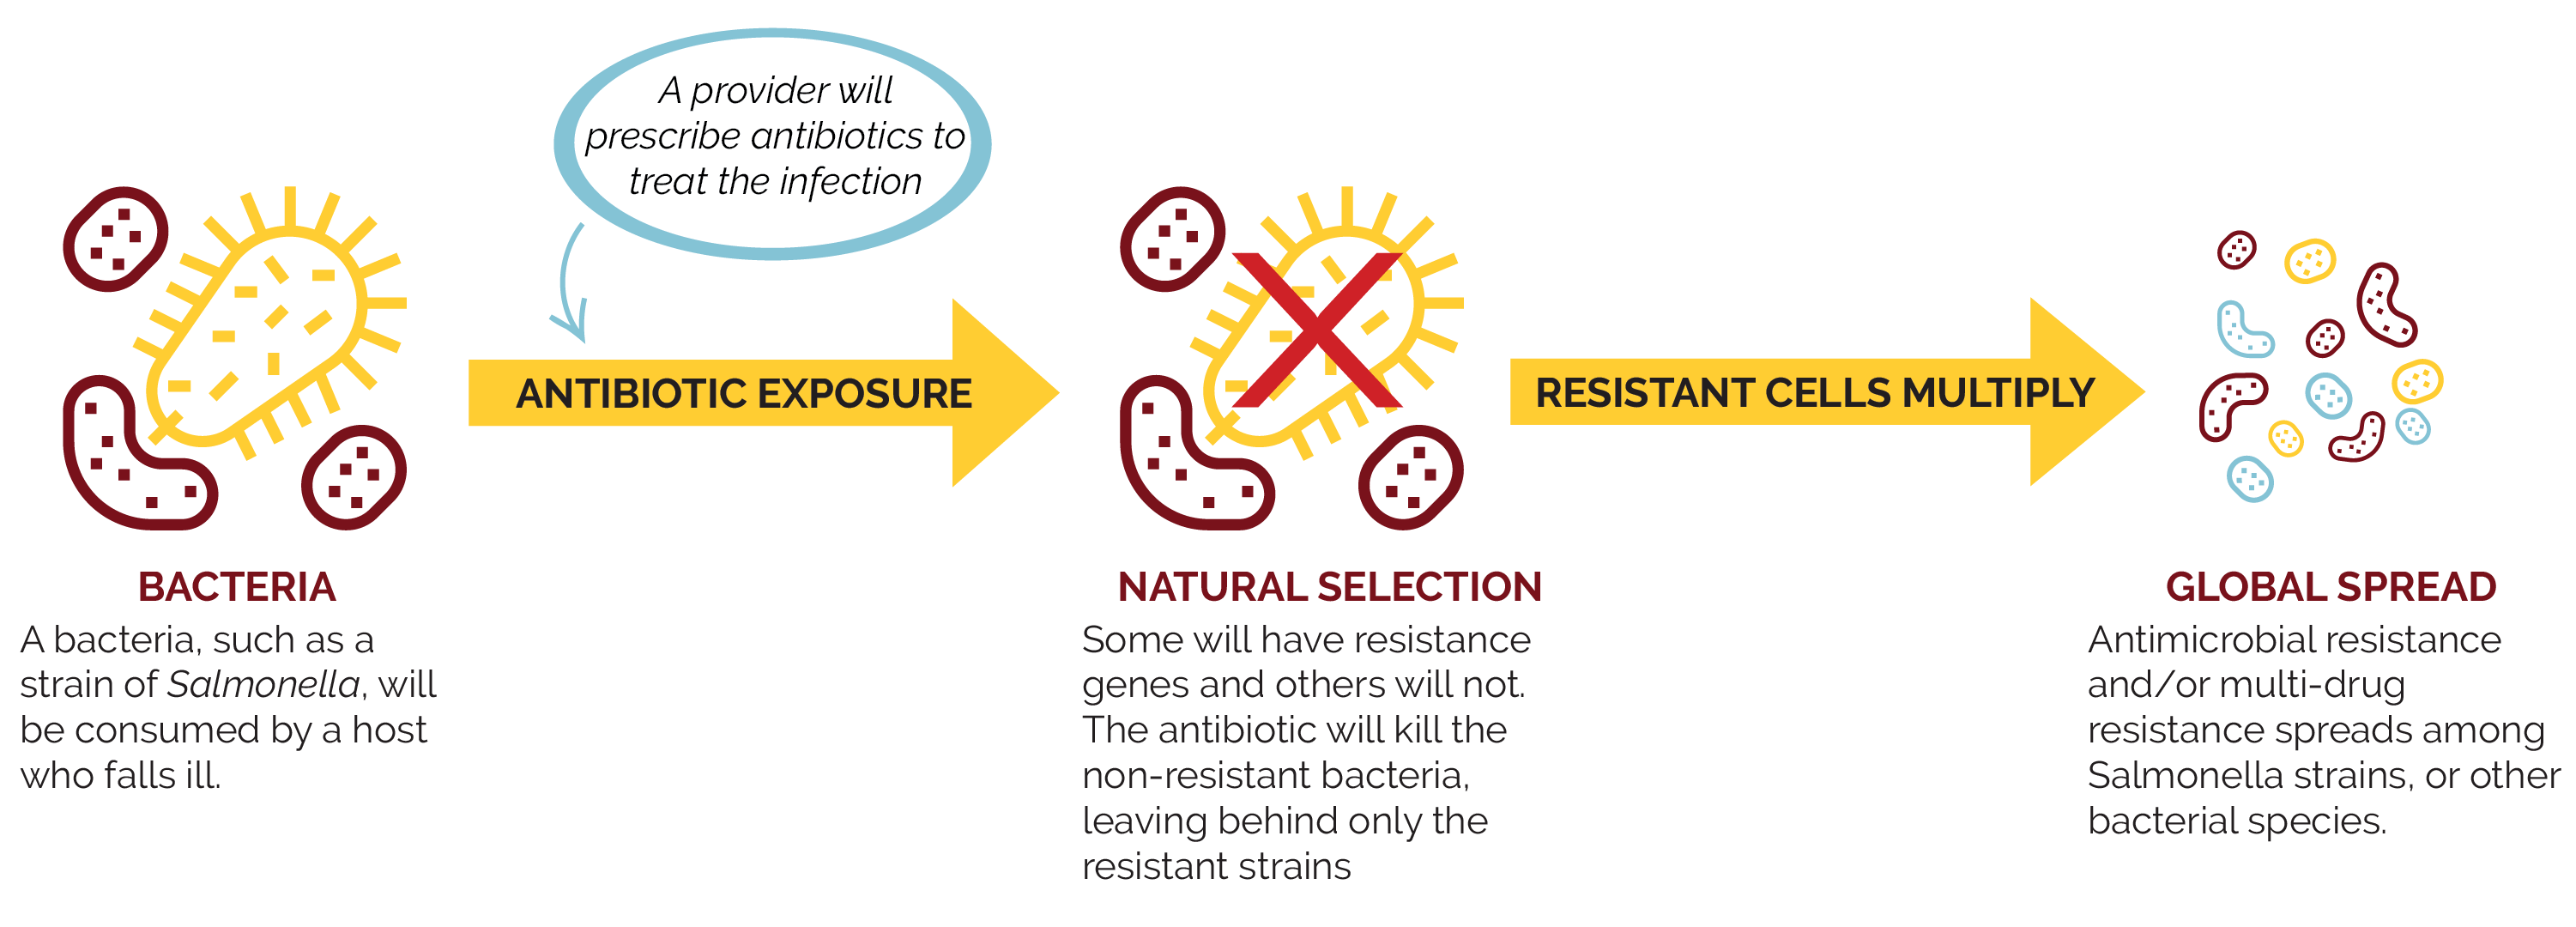 infographic demonstrating how antibiotic resistance spreads